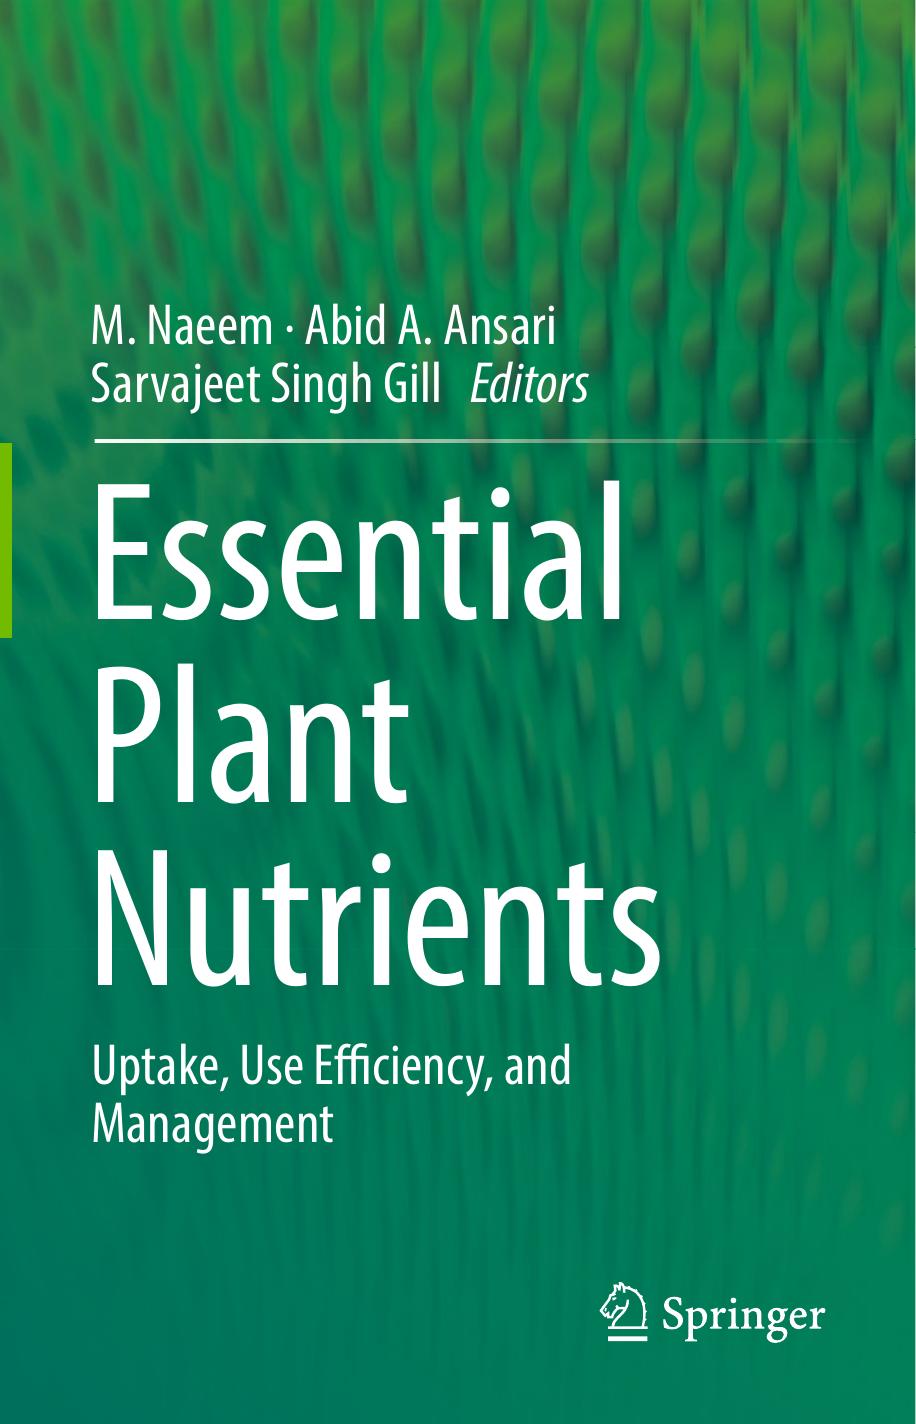 Essential plant nutrients   uptake, use efficiency, and management 2017